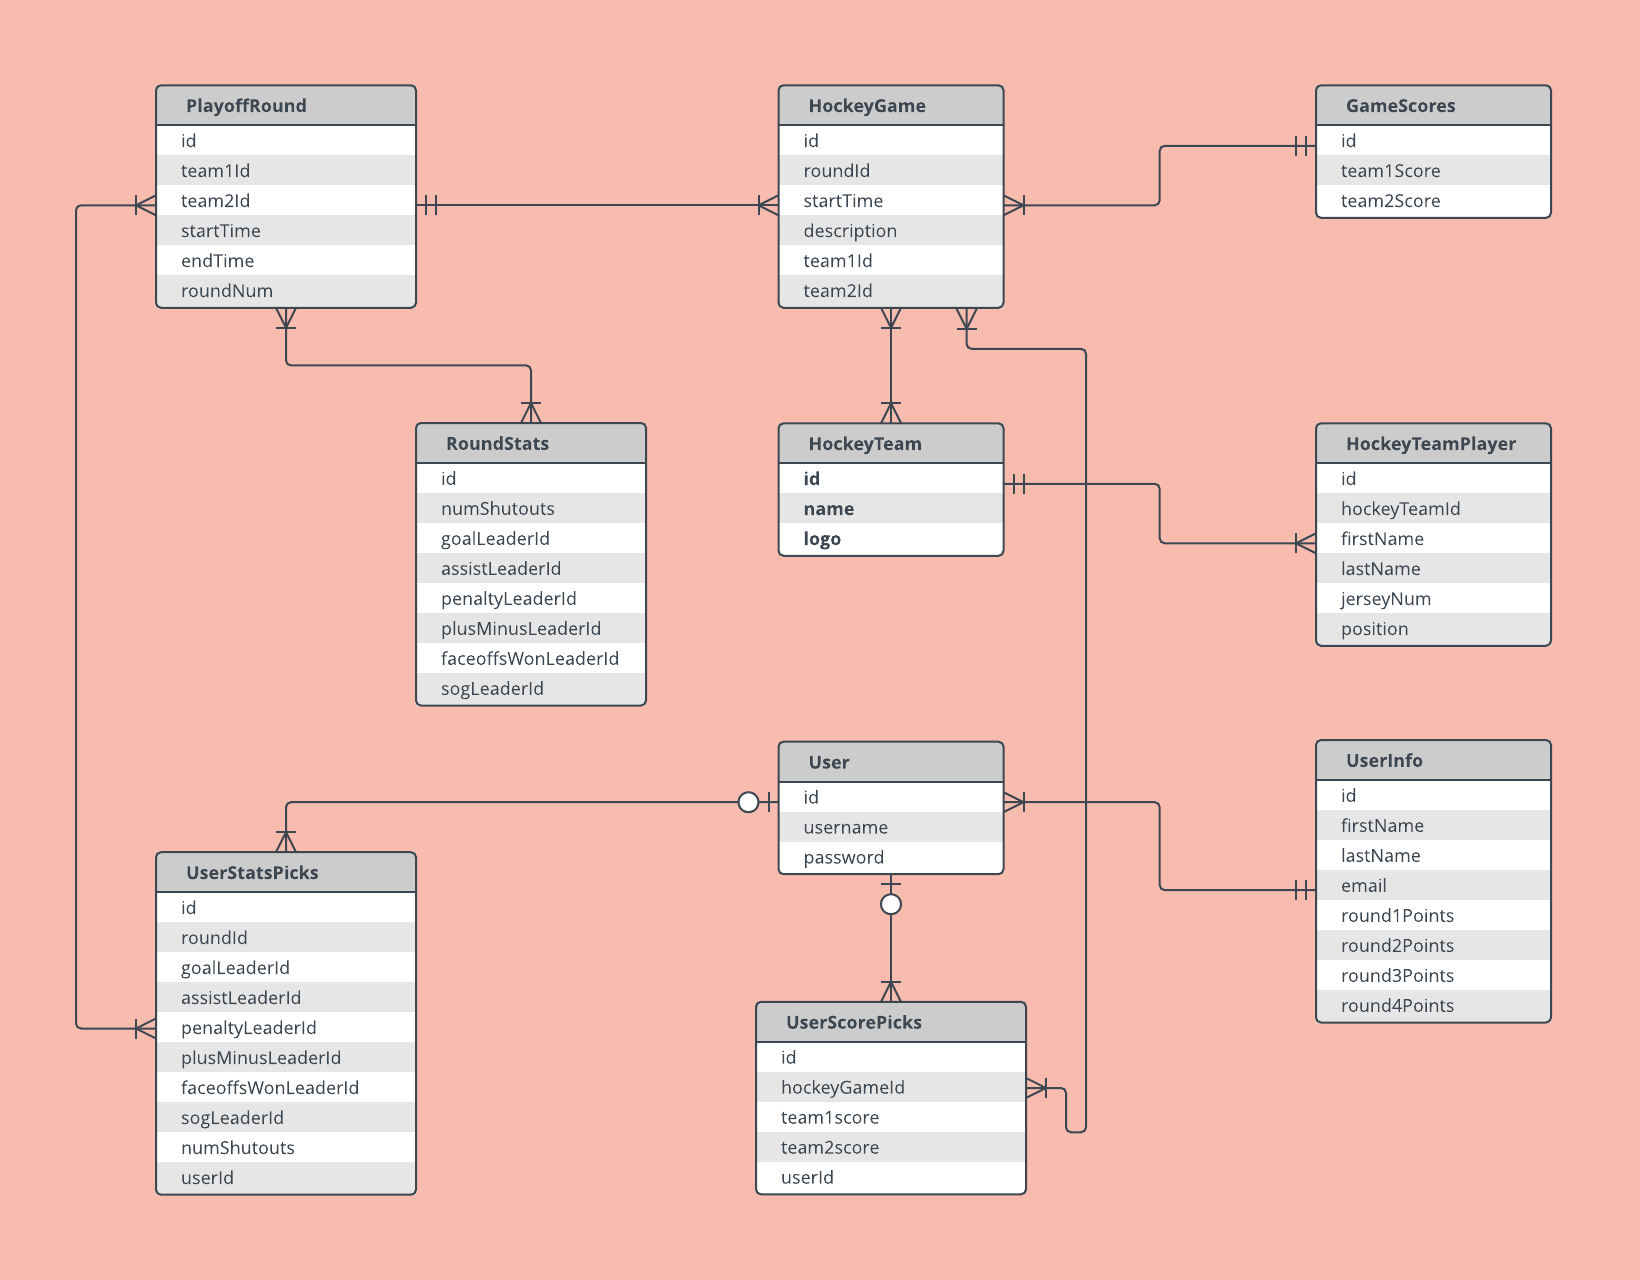 Er Diagram Examples And Templates | Lucidchart in Er Diagram Practice Problems With Solutions